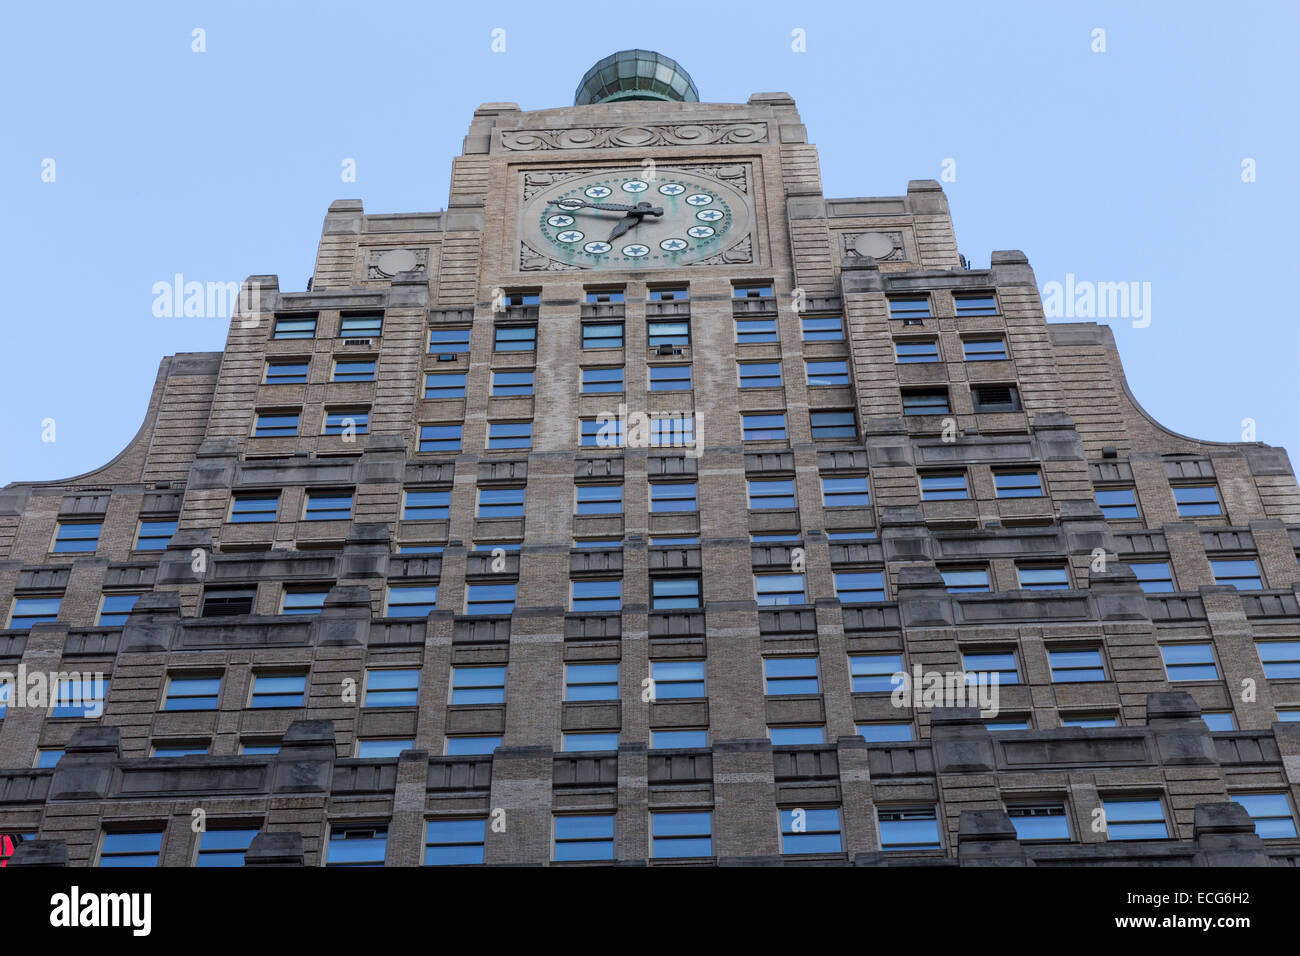 501 Broadway, auch bekannt als Paramount Building, Times Square, New York Stockfoto